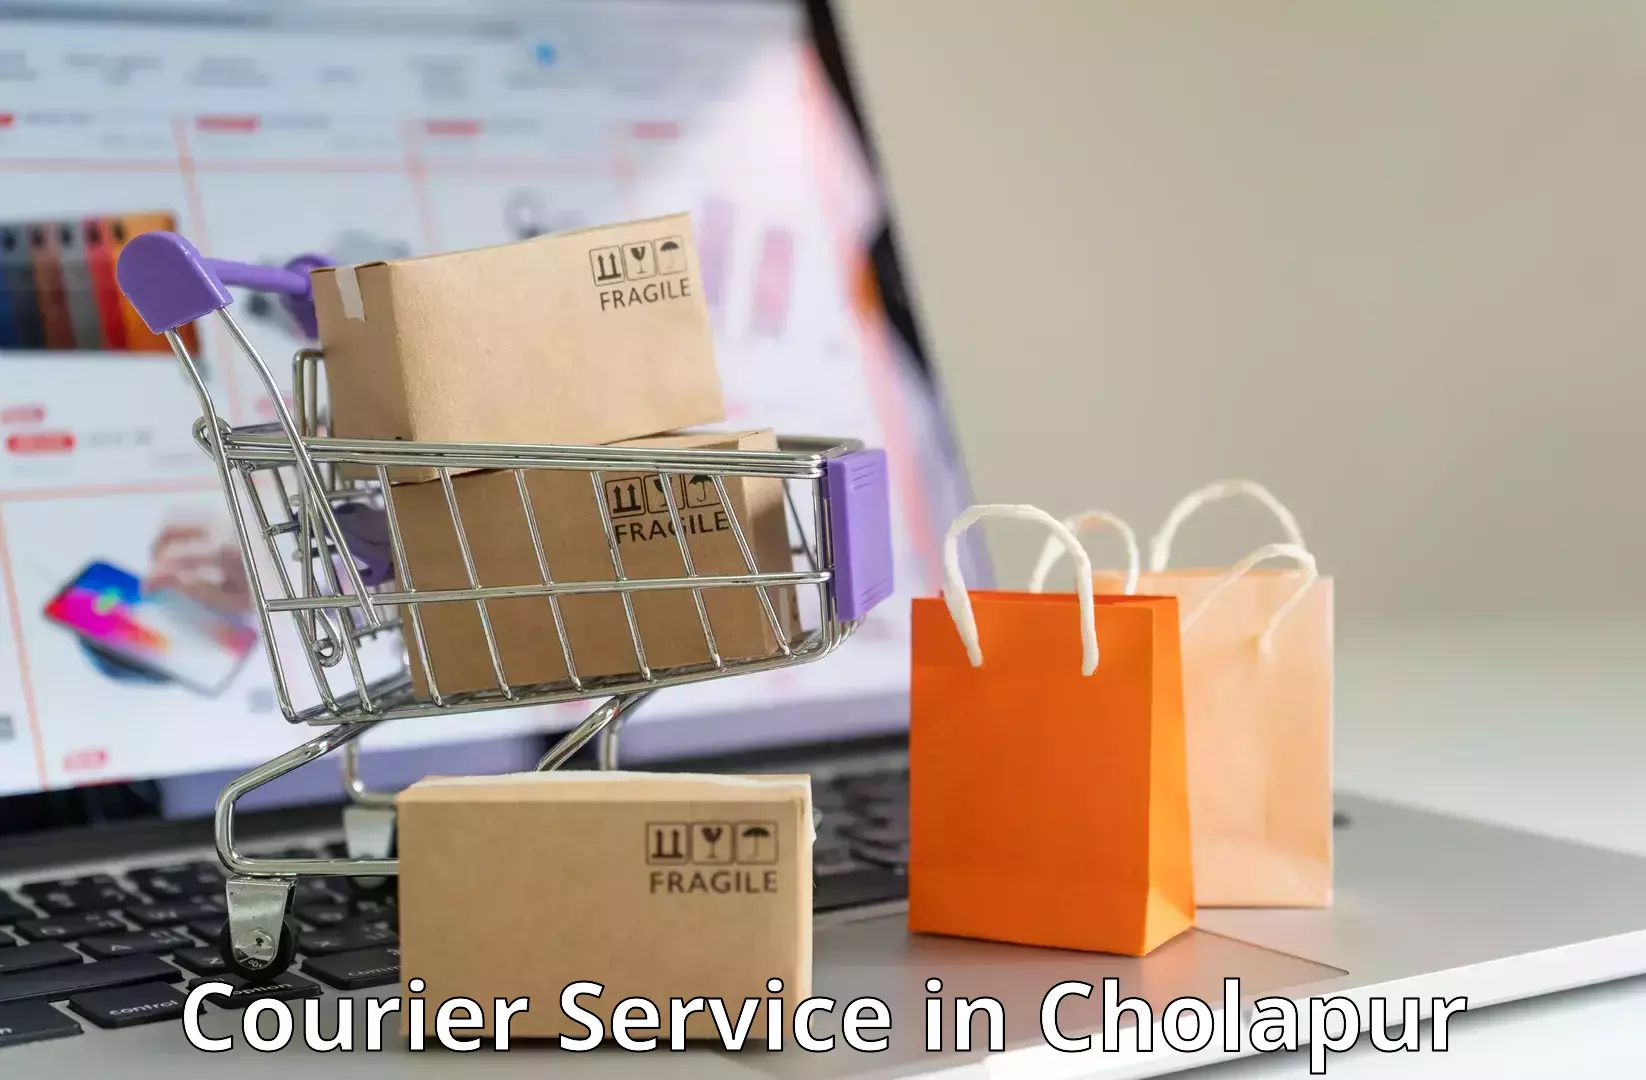 Courier dispatch services in Cholapur